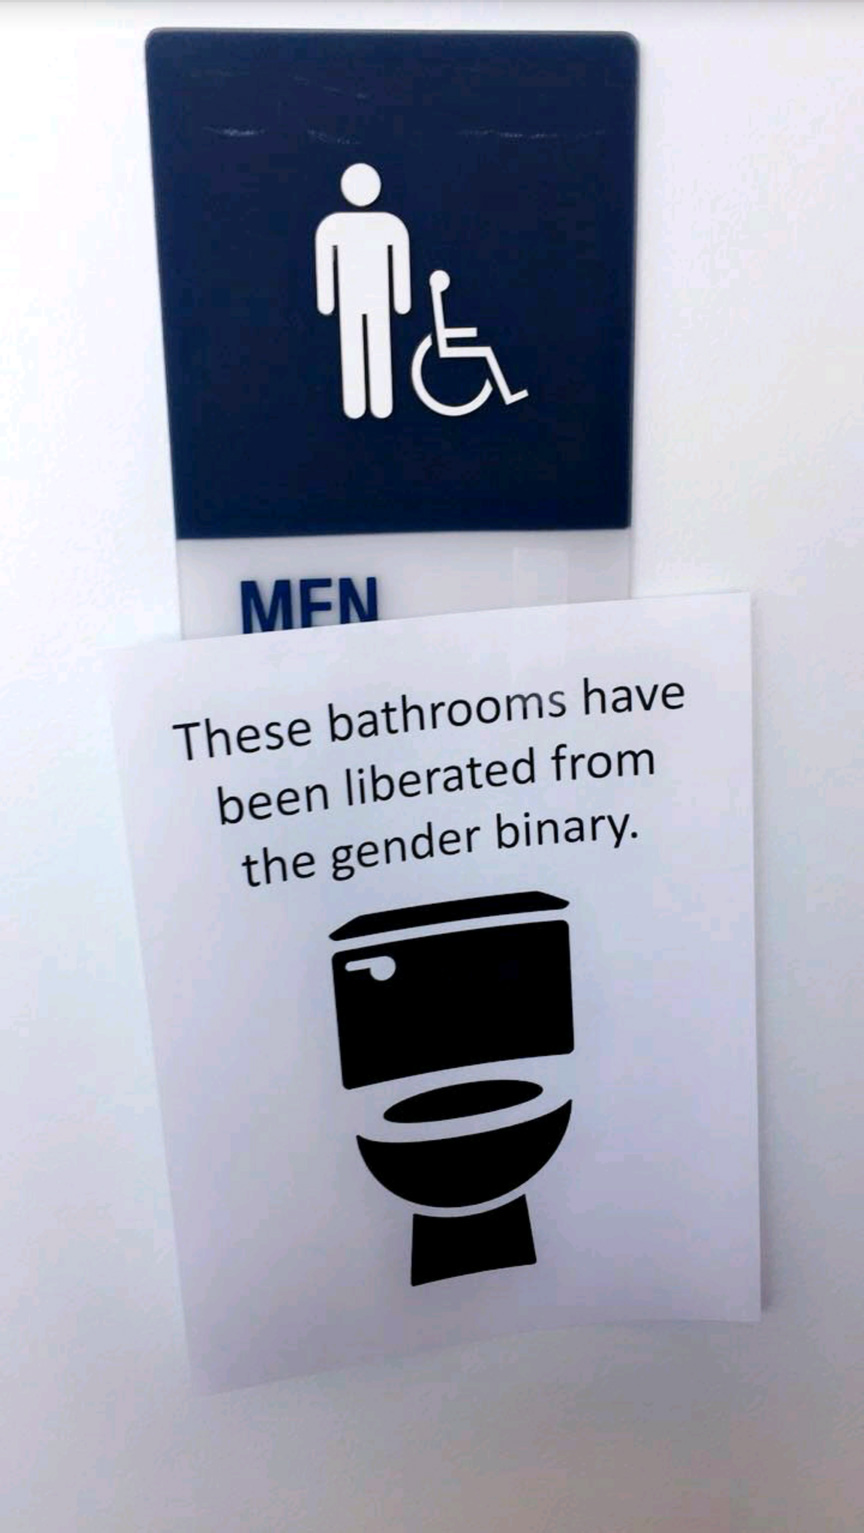 label - Men These bathrooms have been liberated from the gender binary.